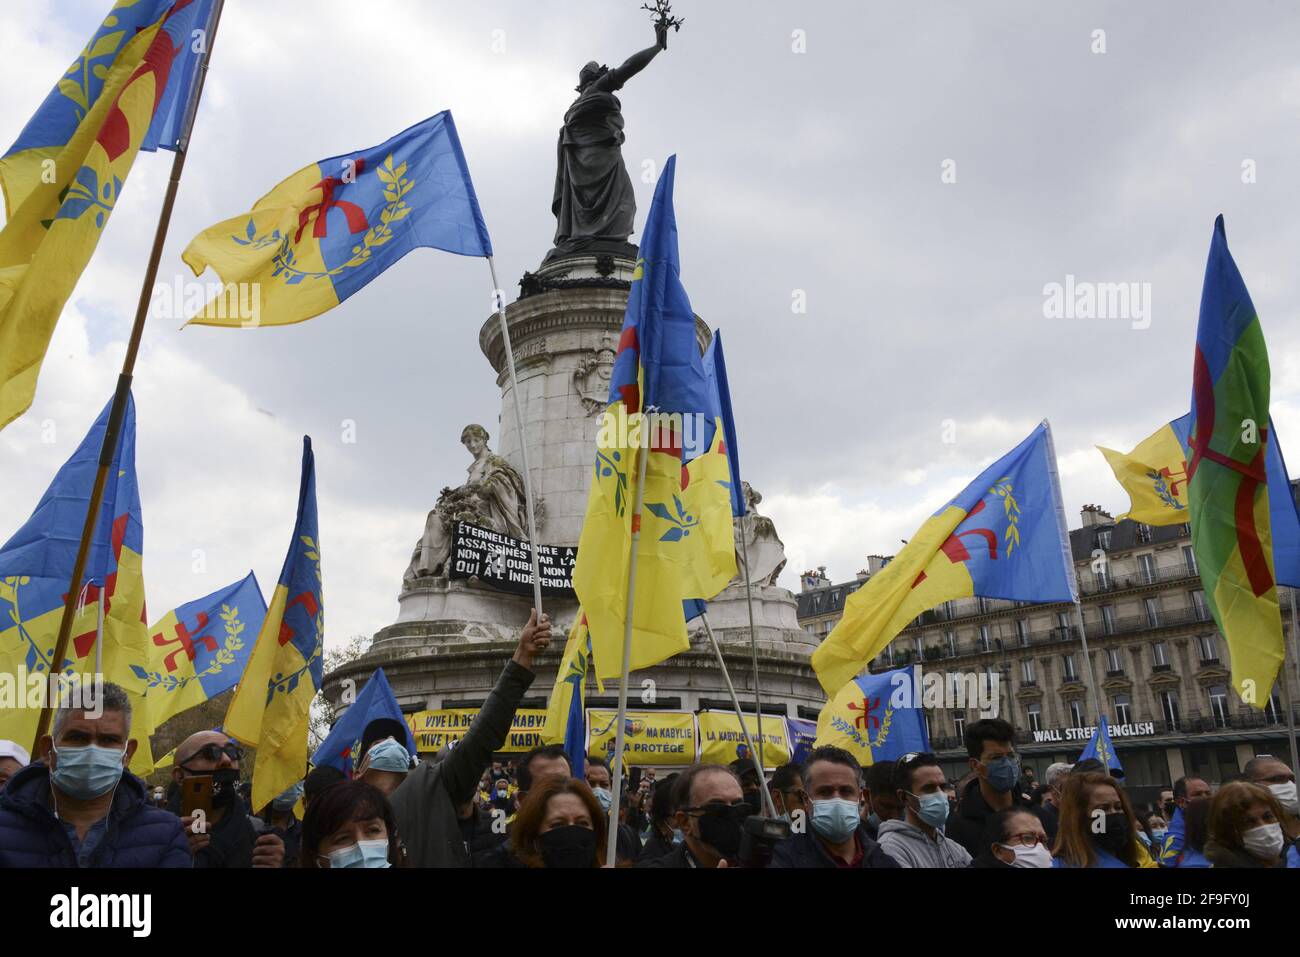 Several thousand Kabyle supporters of the independence of Kabylia gathered on the Place de la République to celebrate the process of the self-determination referendum of the Kabyle people which will be started on June 20, 2021. Paris, France, on April 18, 2021. Photo by Georges Darmon/Avenir Pictures/ABACAPRESS.COM Stock Photo